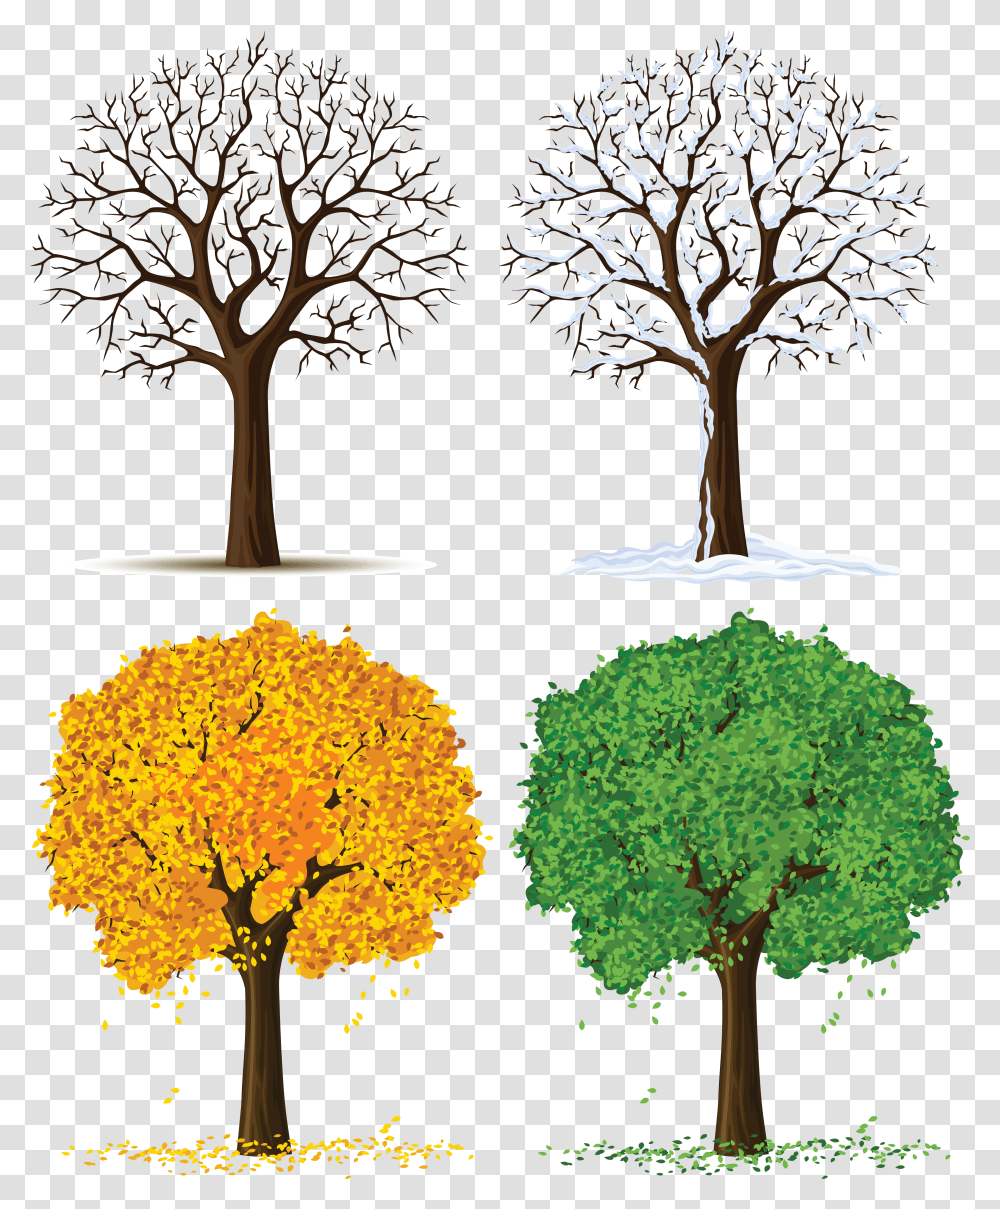 Plants In Different Seasons Transparent Png